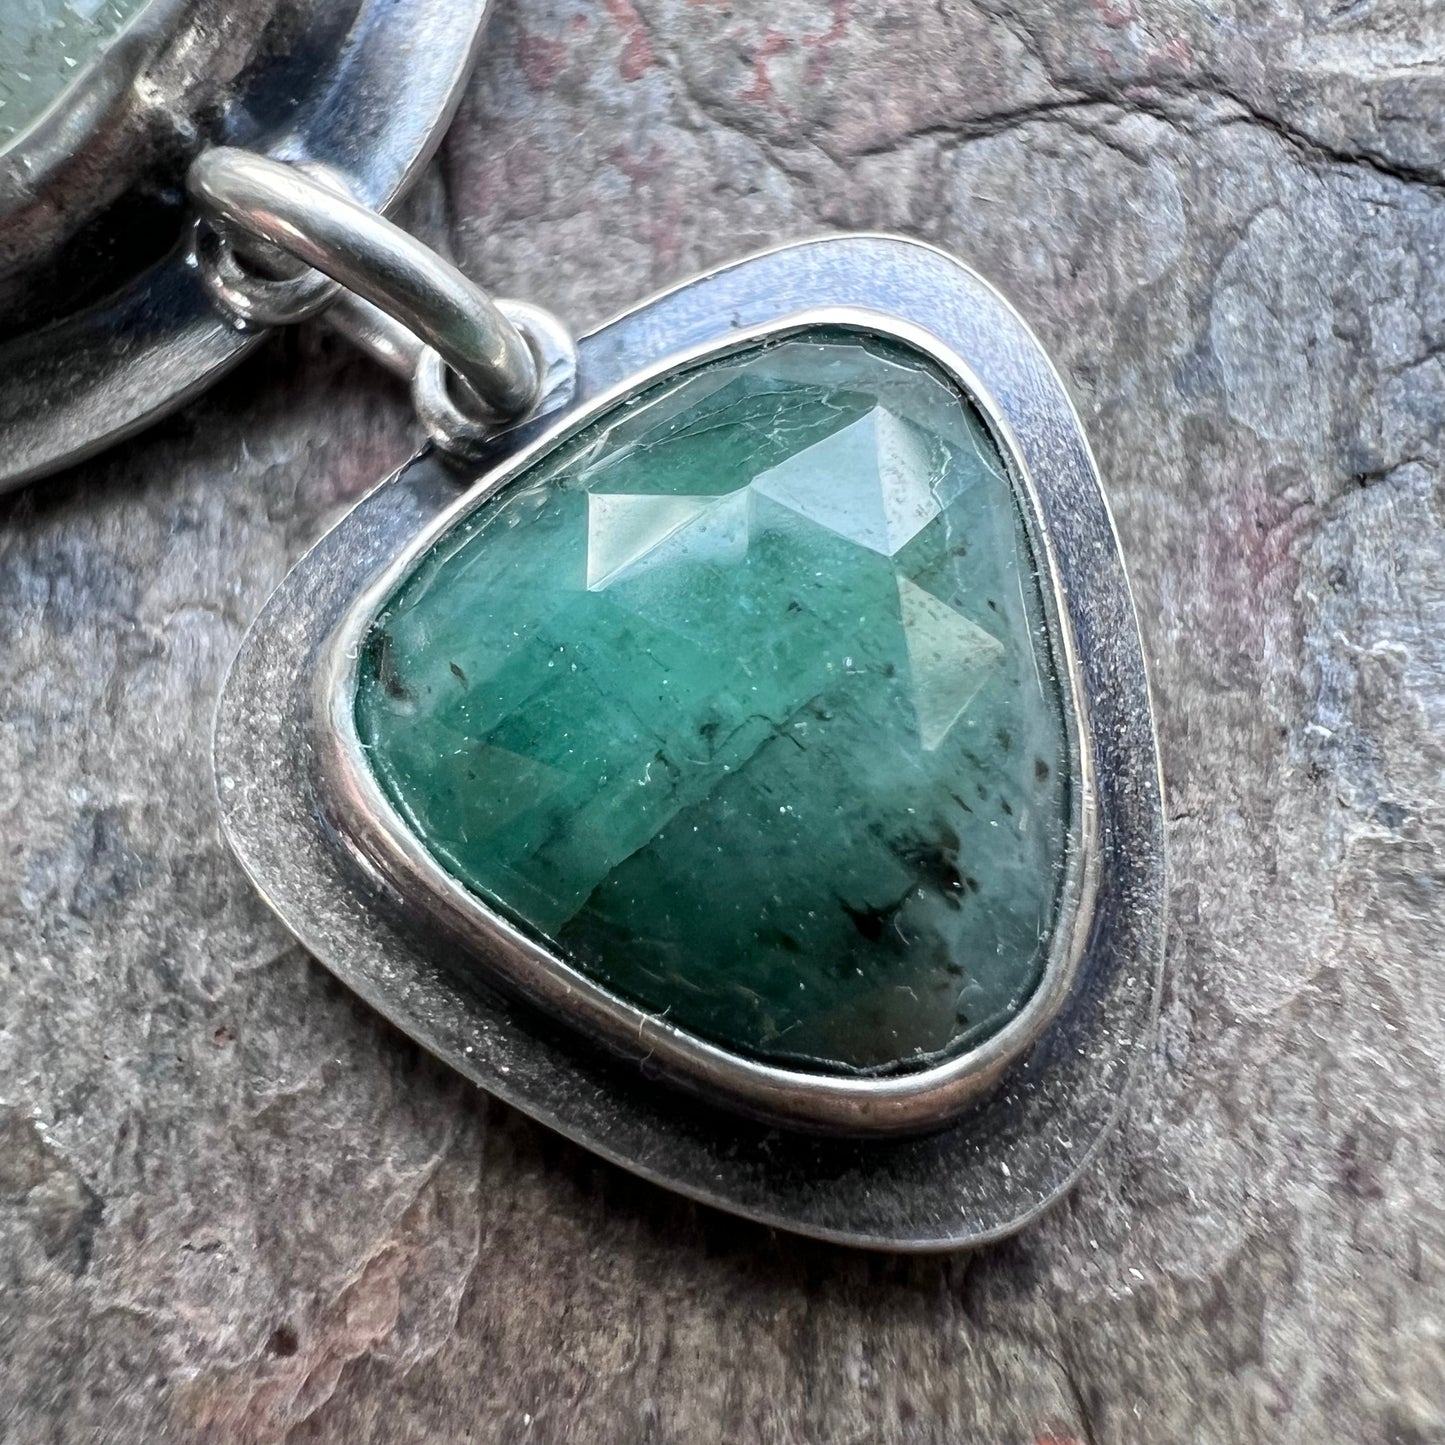 SOLD Sterling Silver Labradorite, Druzy, and Emerald Necklace - Handmade One-of-a-kind Pendant on Sterling Silver Chain